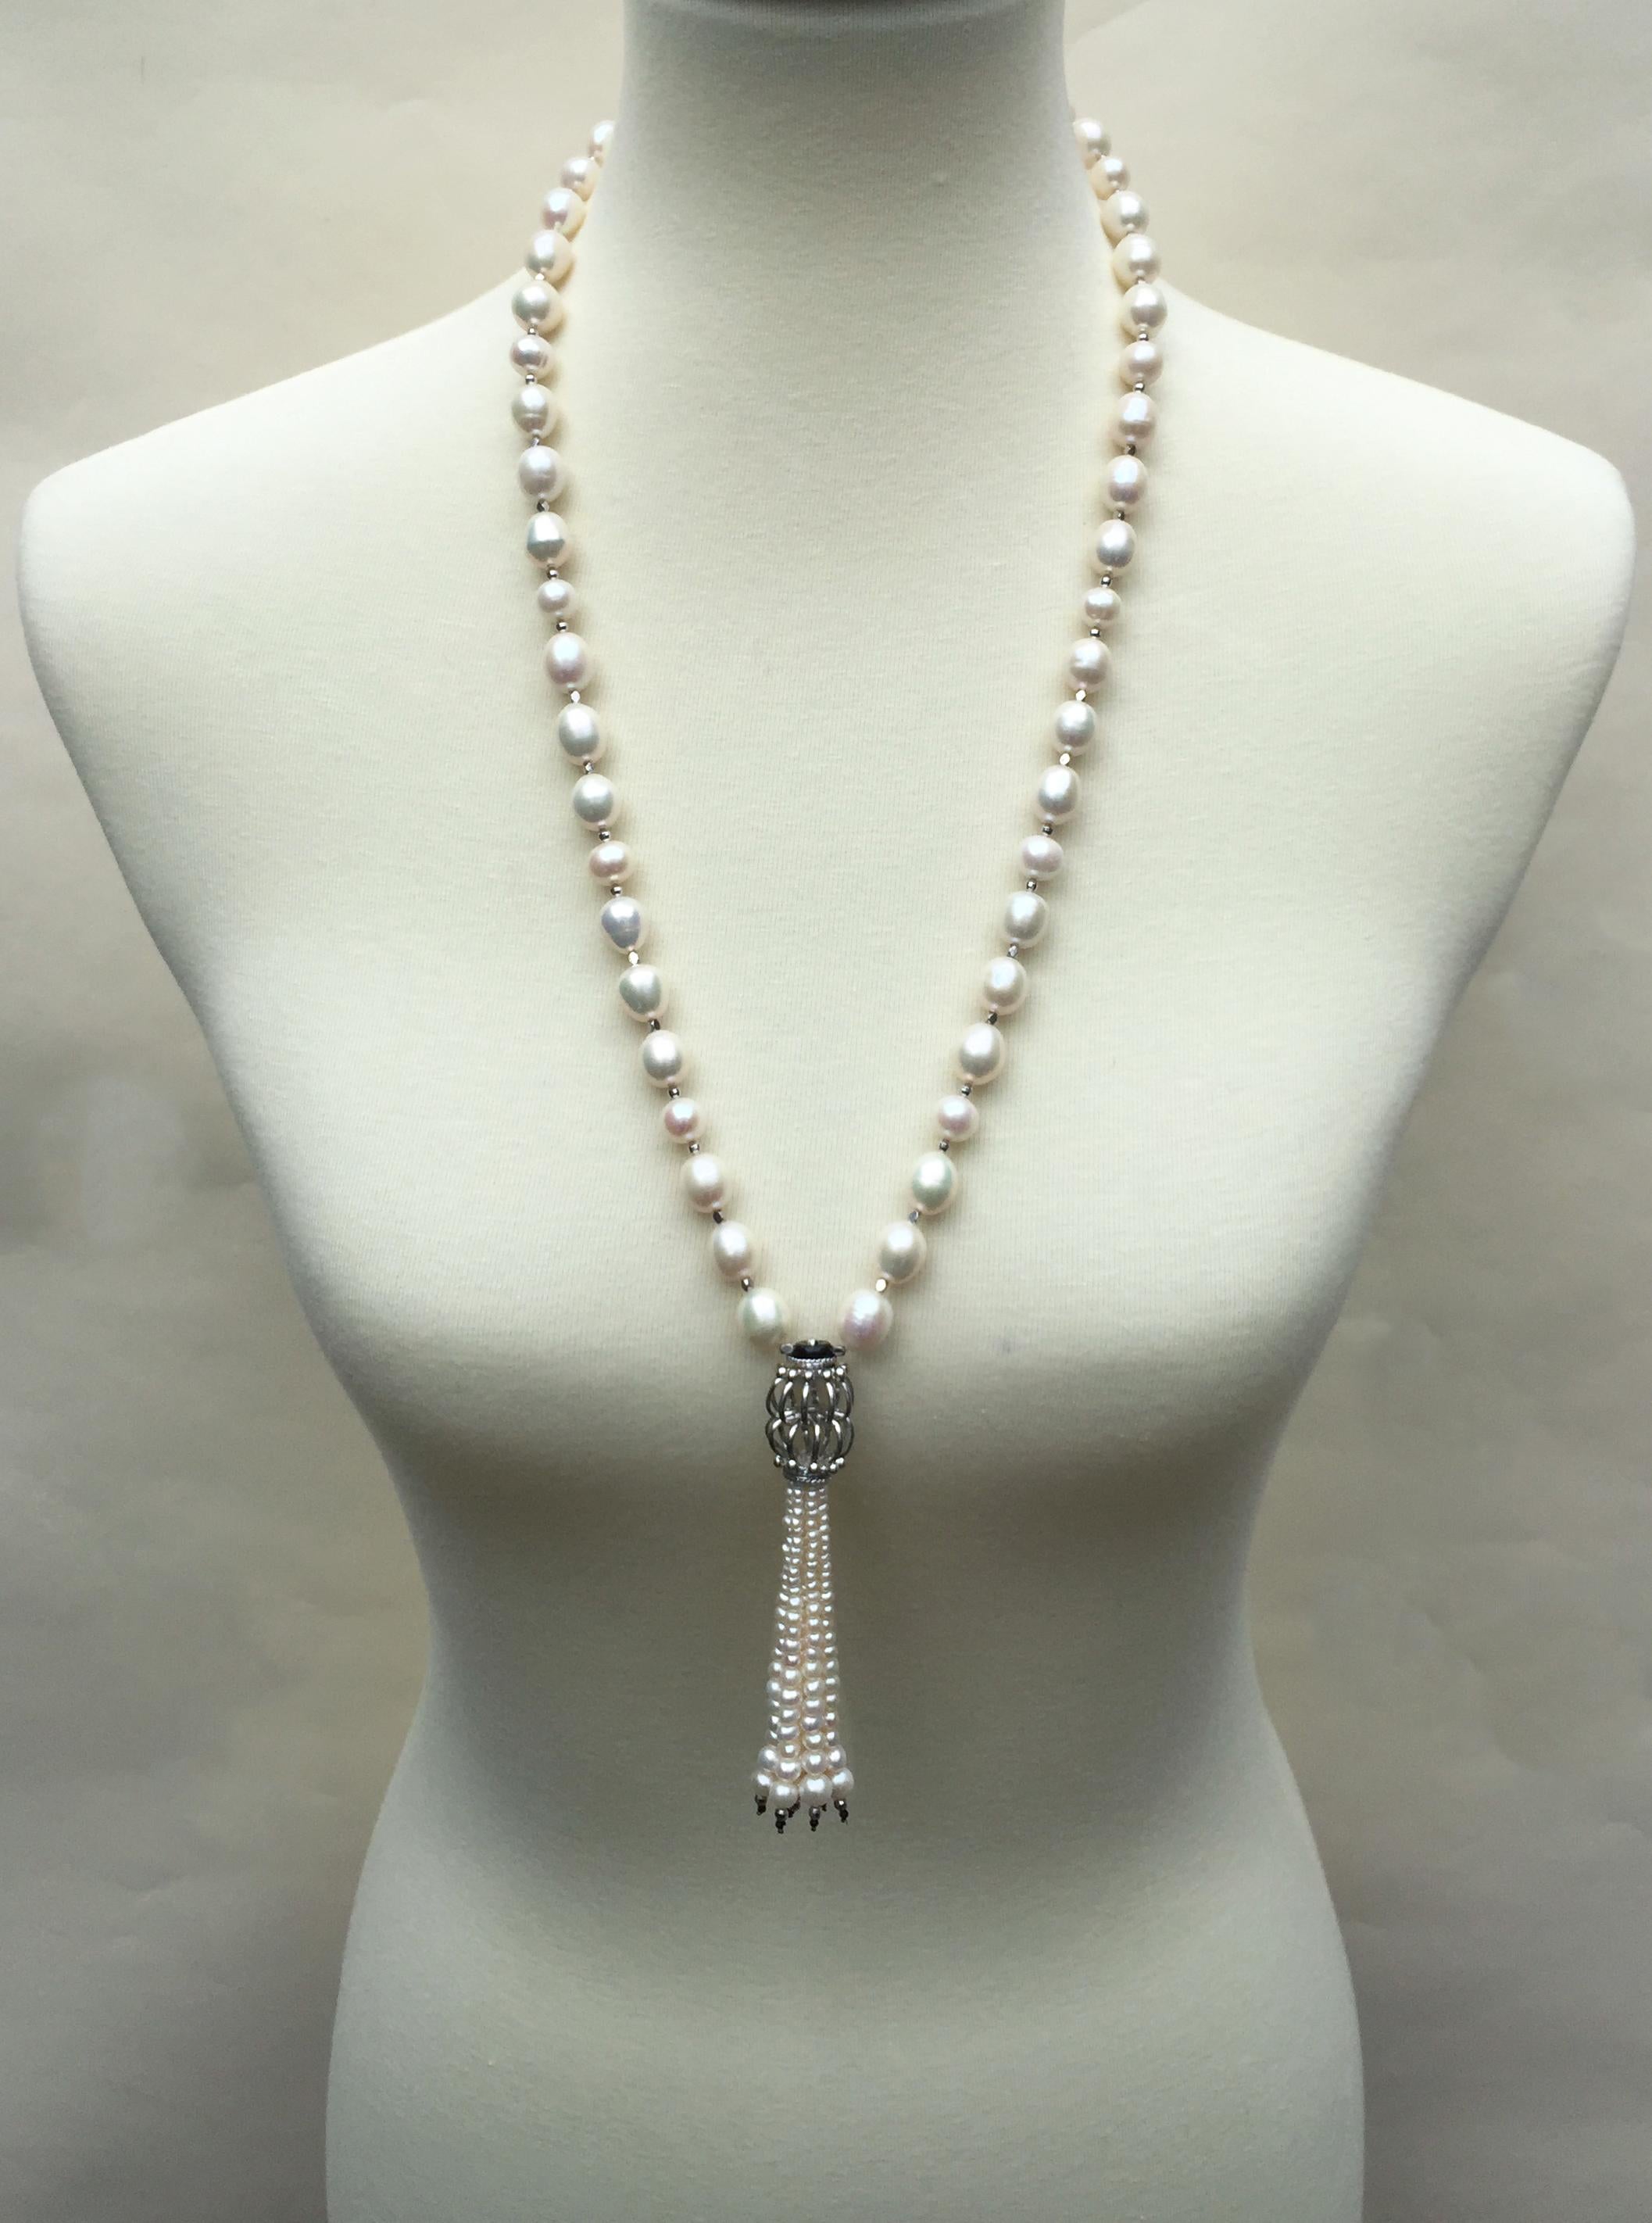 Marina J White Pearl Long Necklace with Sterling Silver Beads and Black Onyx 1